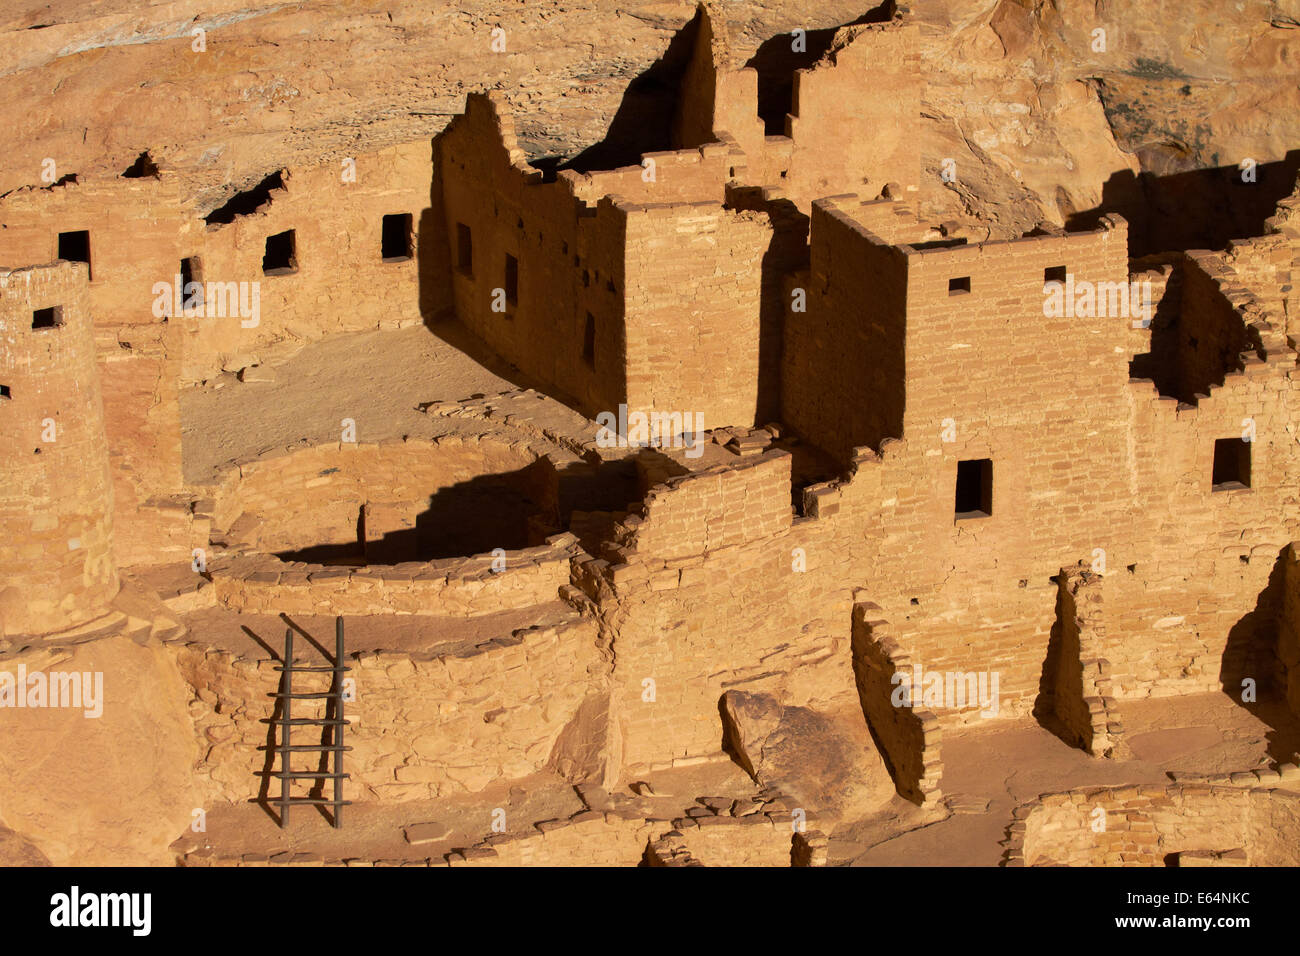 Cliff Palace (over 700 years old), Mesa Verde National Park (UNESCO World Heritage Site), Colorado, USA Stock Photo